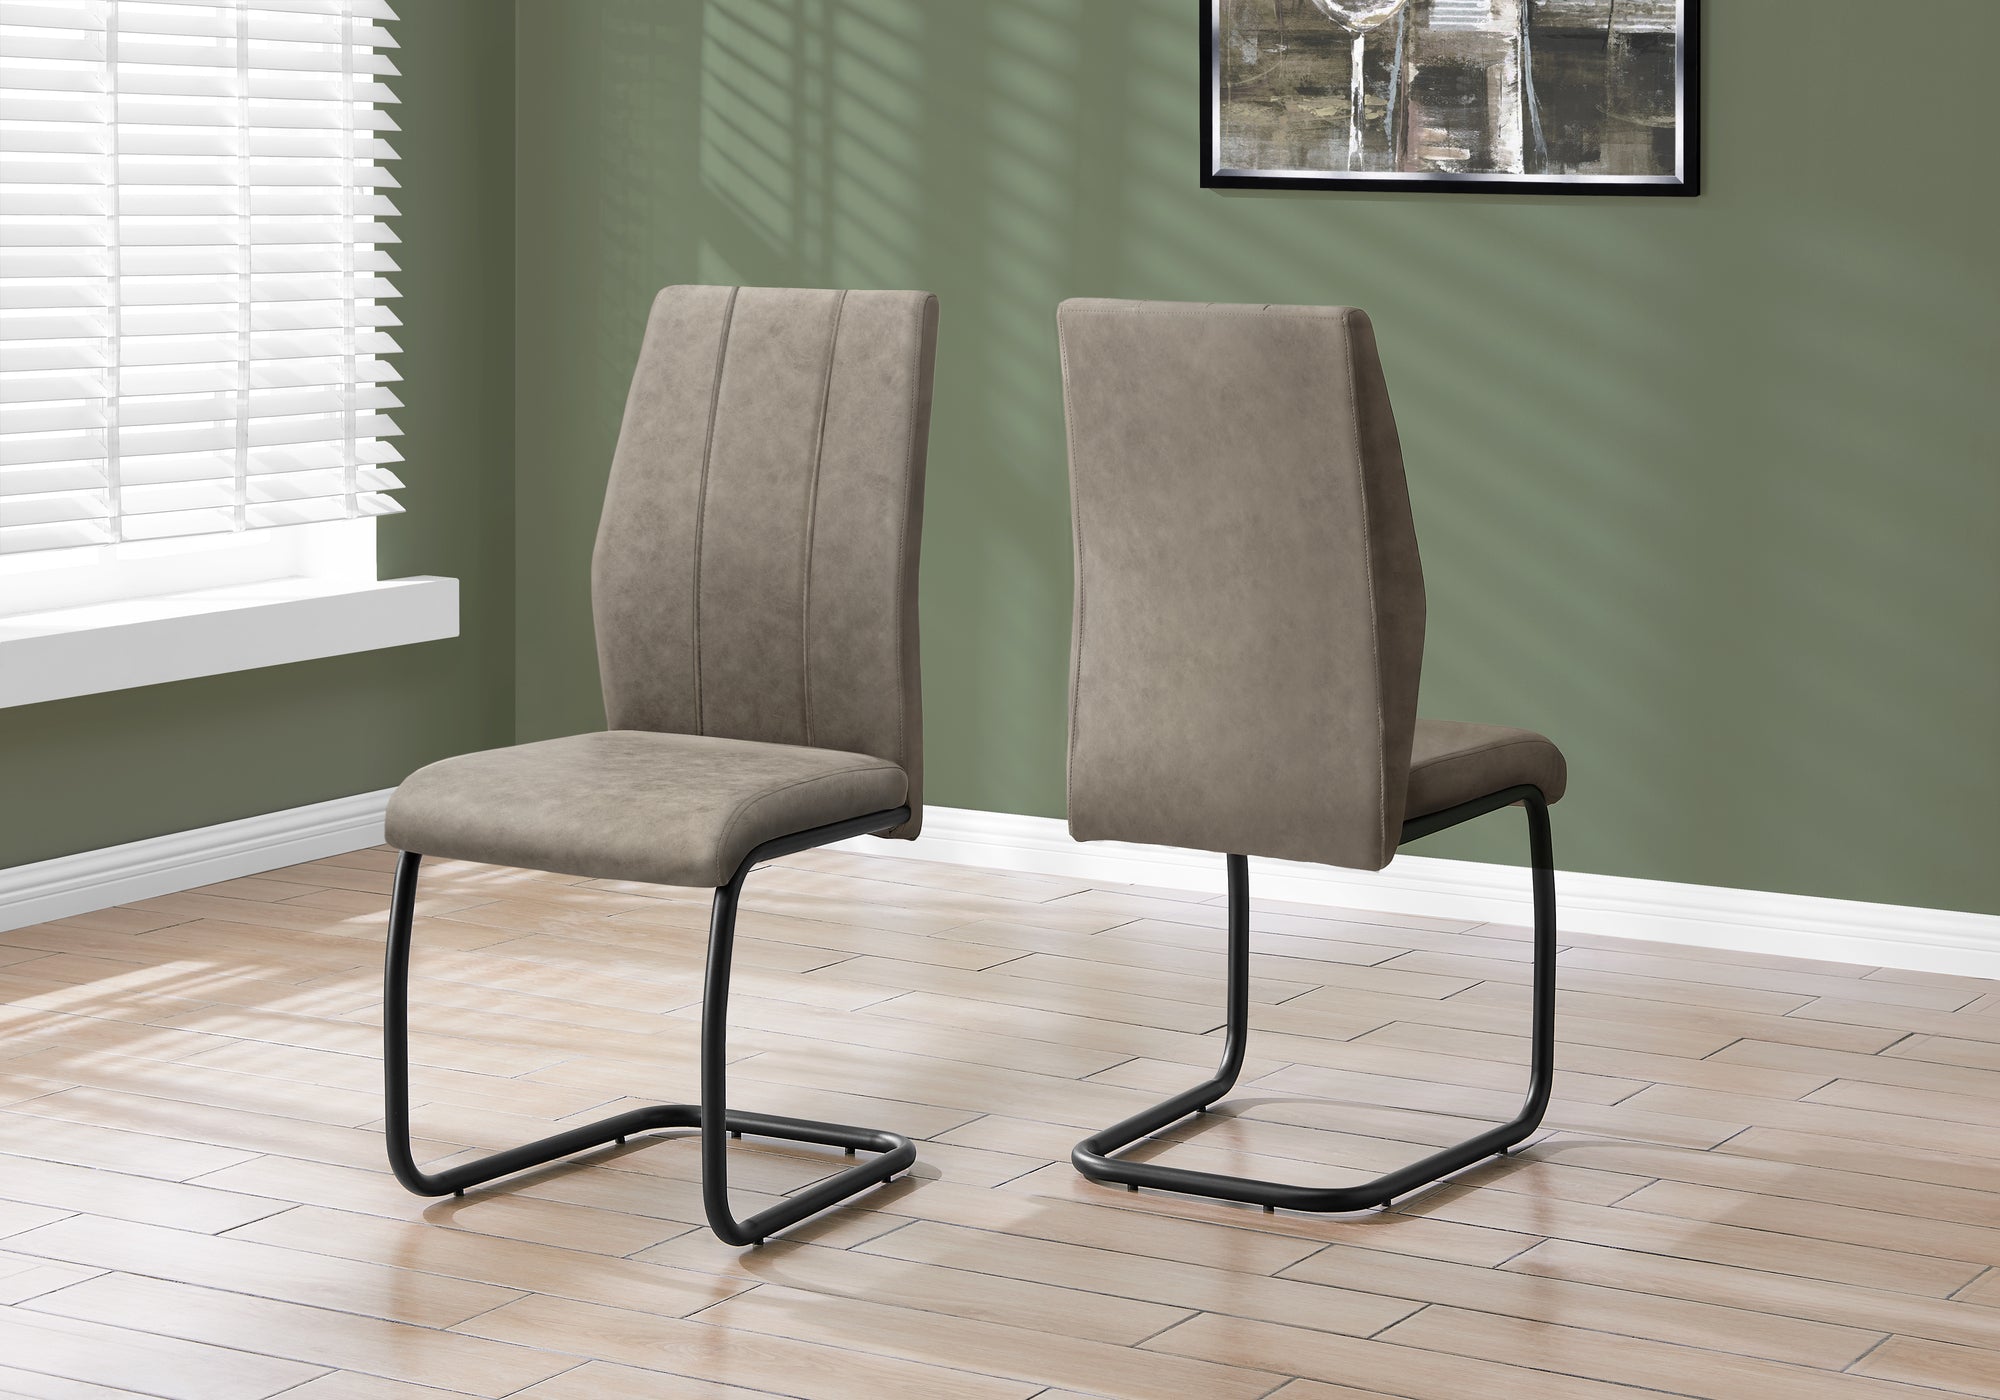 MN-571114    Dining Chair, Set Of 2, Side, Pu Leather-Look, Upholstered, Metal Legs, Kitchen, Dining Room, Velvet, Metal Legs, Taupe, Black, Contemporary, Modern